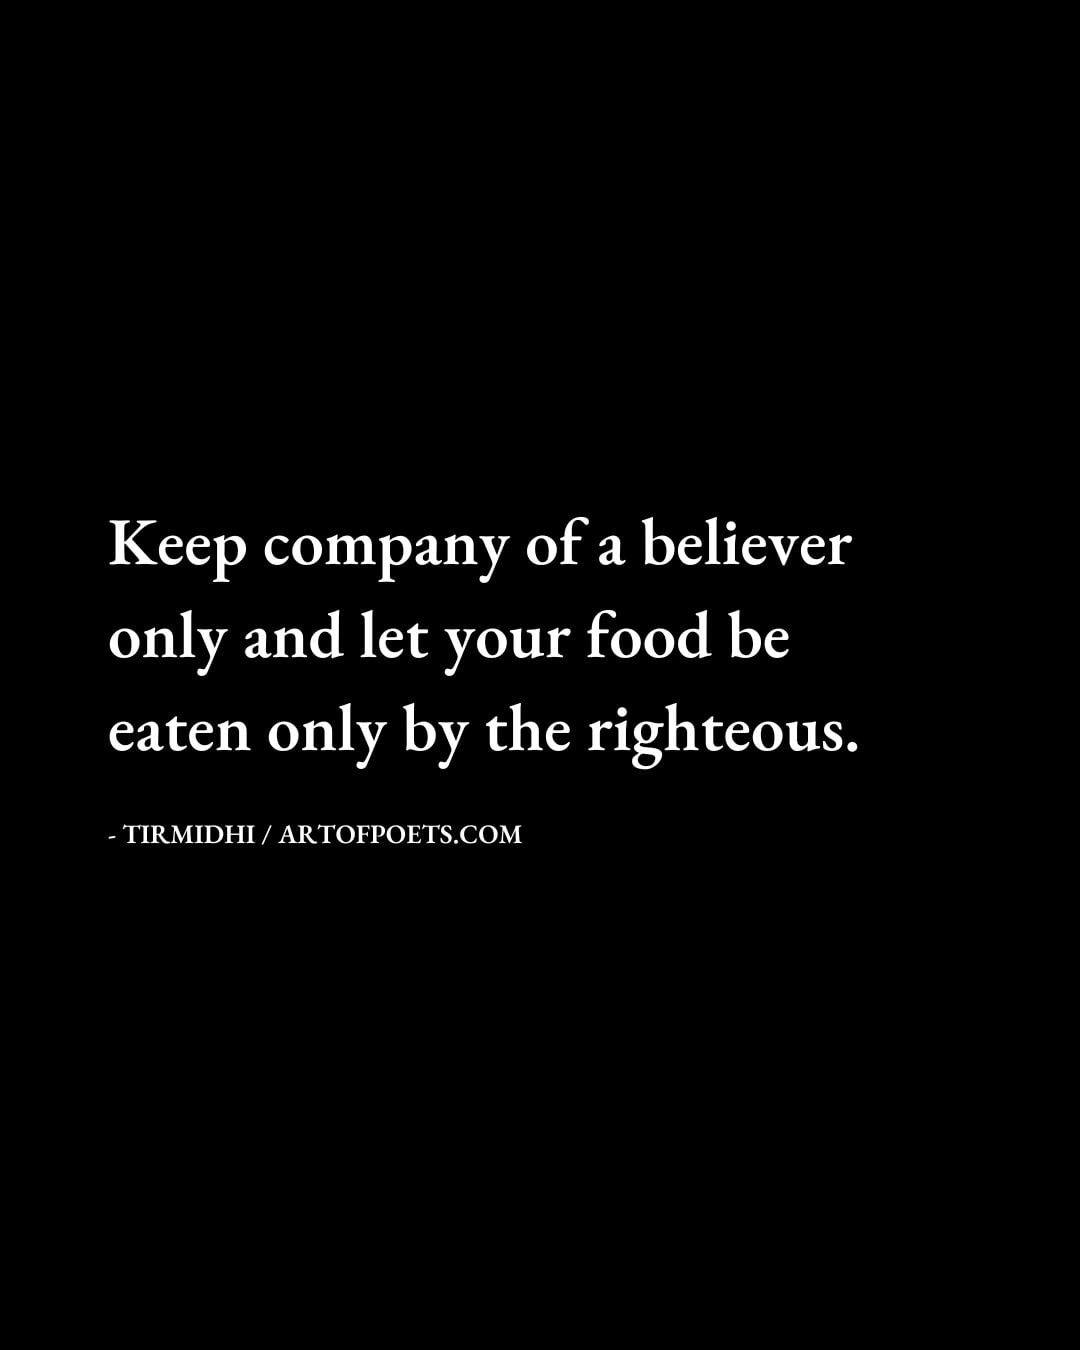 Keep company of a believer only and let your food be eaten only by the righteous. Tirmidhi